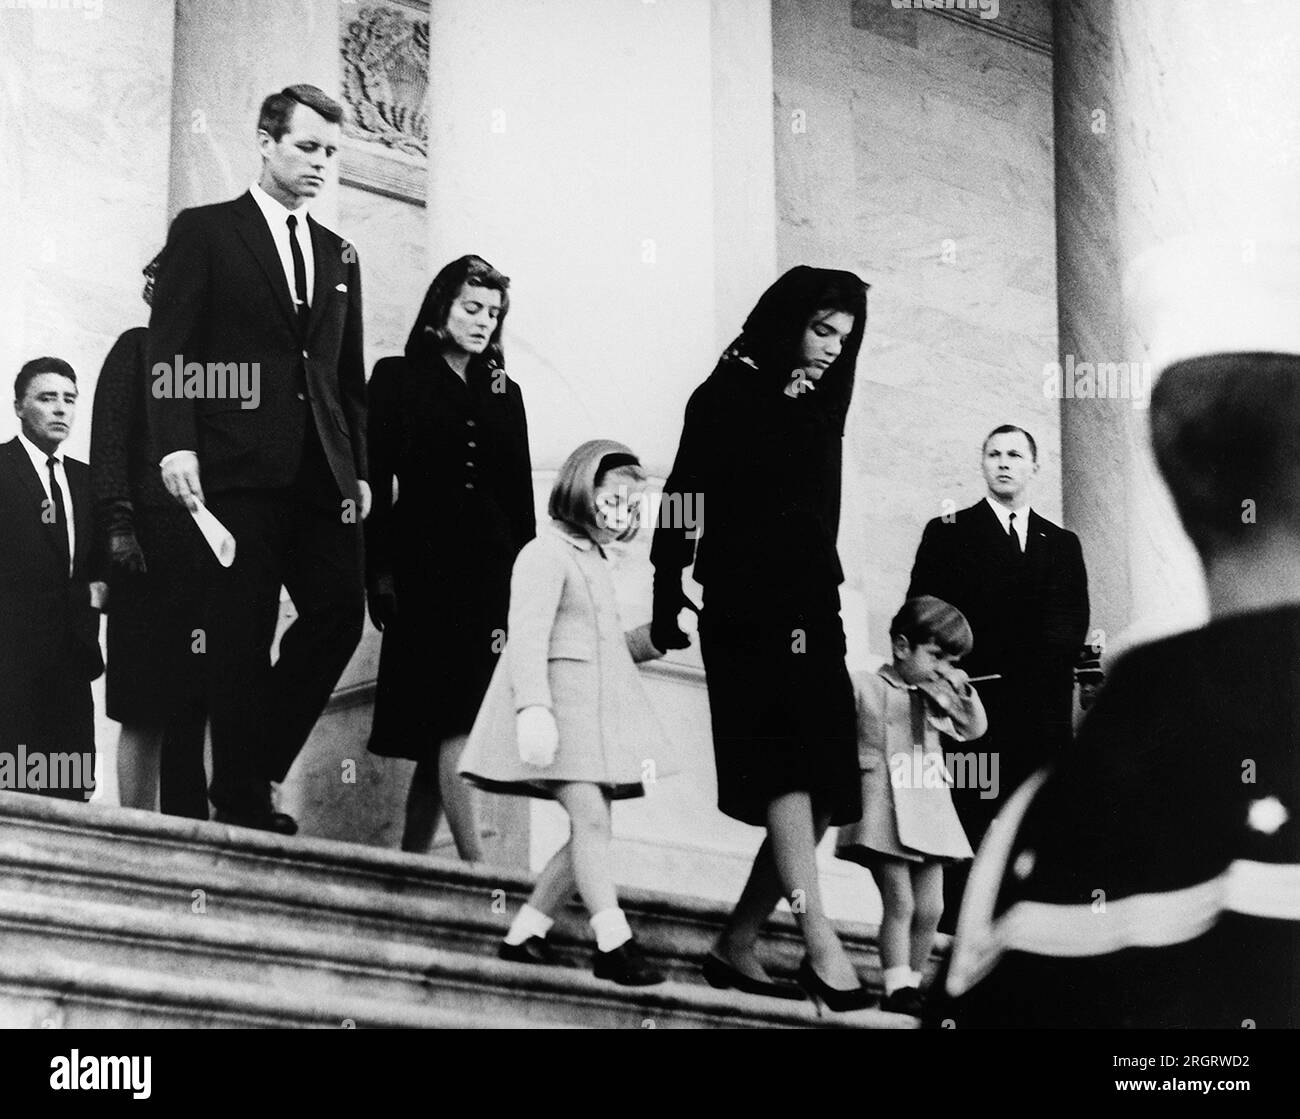 Washington, D.C.:  November 25, 1963 The President's family leaves the Capitol after the funeral ceremony. Front row: Caroline Kennedy, Jacqueline Bouvier Kennedy, John F. Kennedy, Jr. (2nd row) Attorney General Robert F. Kennedy, Patricia Kennedy Lawford (hidden) Jean Kennedy Smith (3rd Row) Peter Lawford. Stock Photo